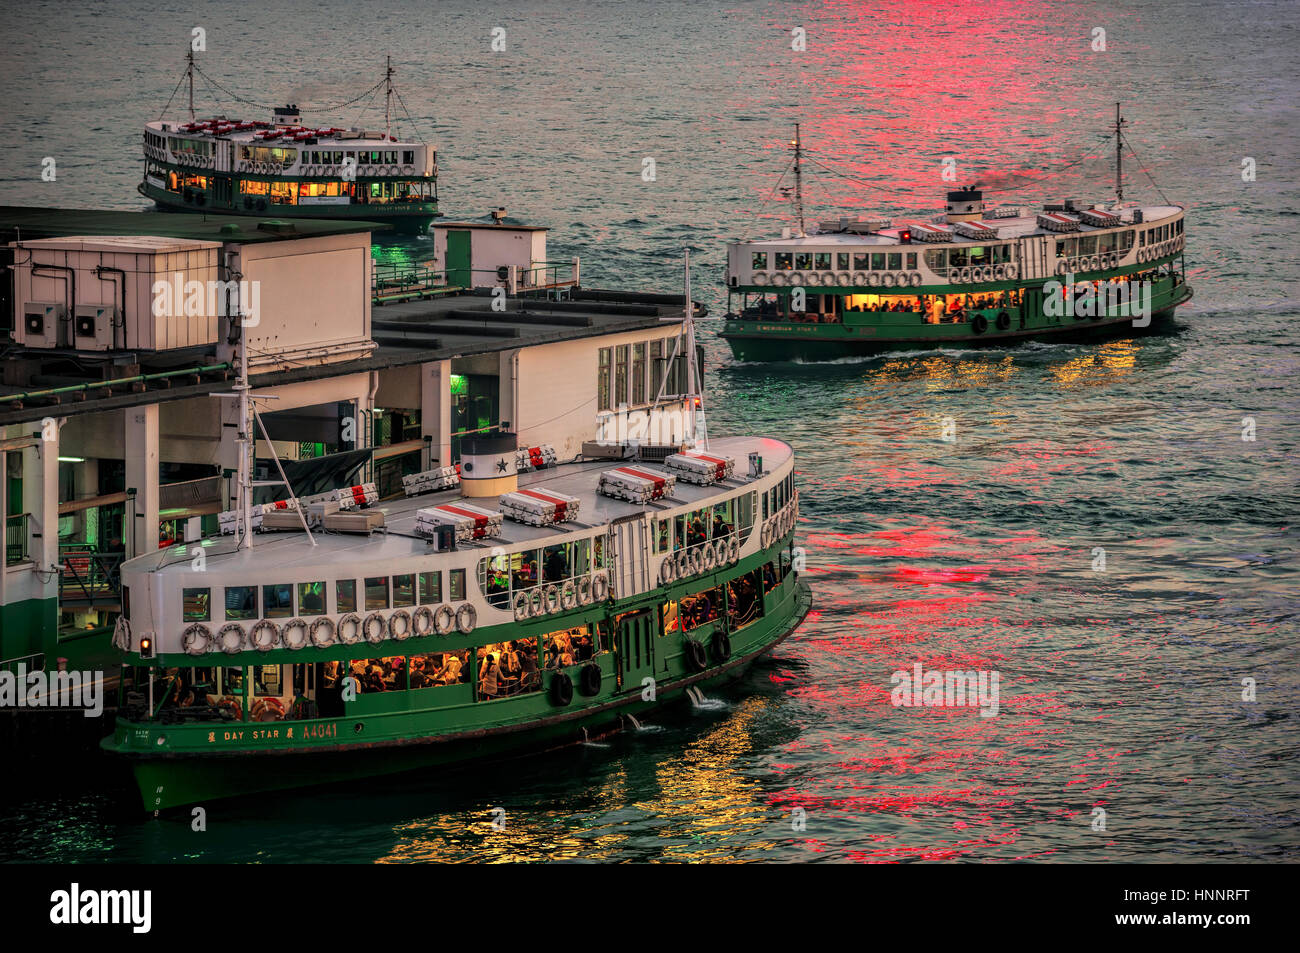 The famous iconic Star Ferry, Hong Kong, China. Stock Photo